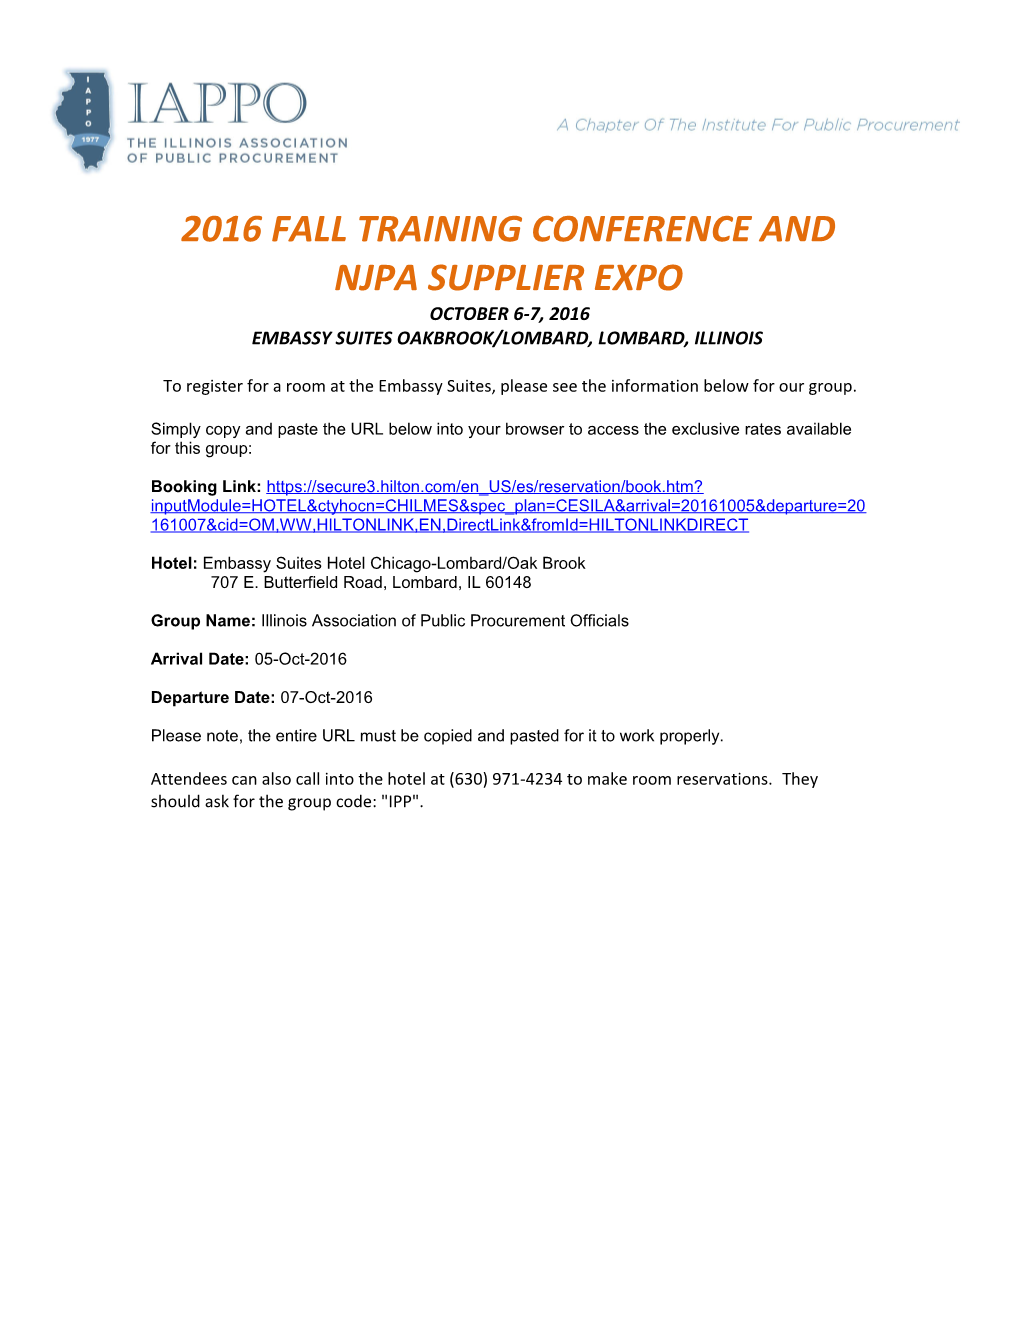 2016 Fall Training Conference and Njpa Supplier Expo